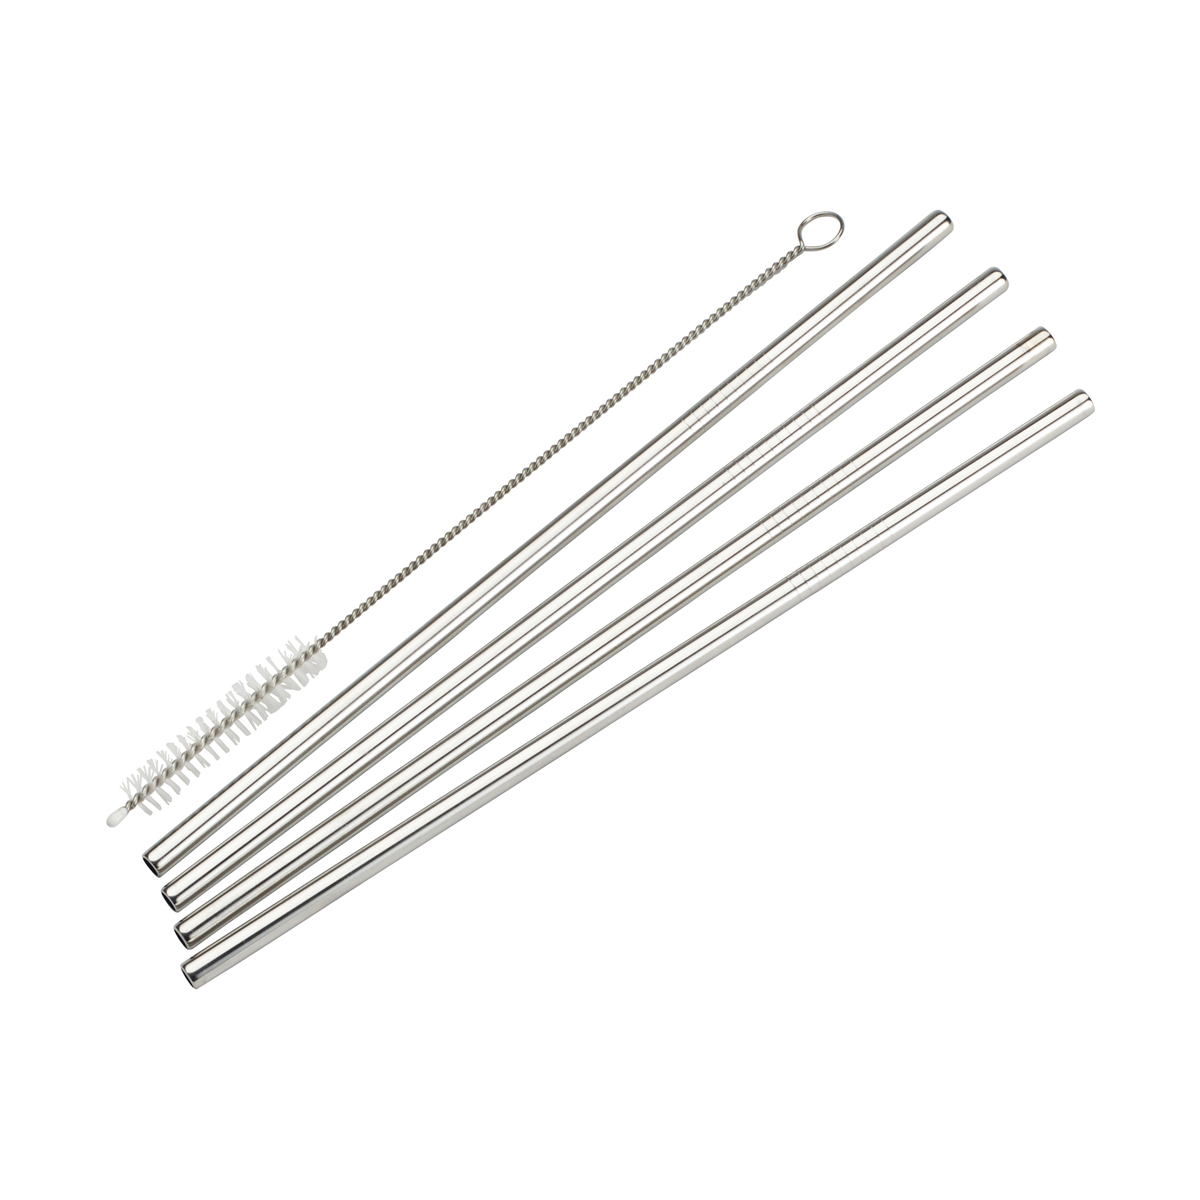 Winco Stainless Steel Straight Drinking Straw Set, 1/4" Dia. x 8-1/2"H, Set of 4